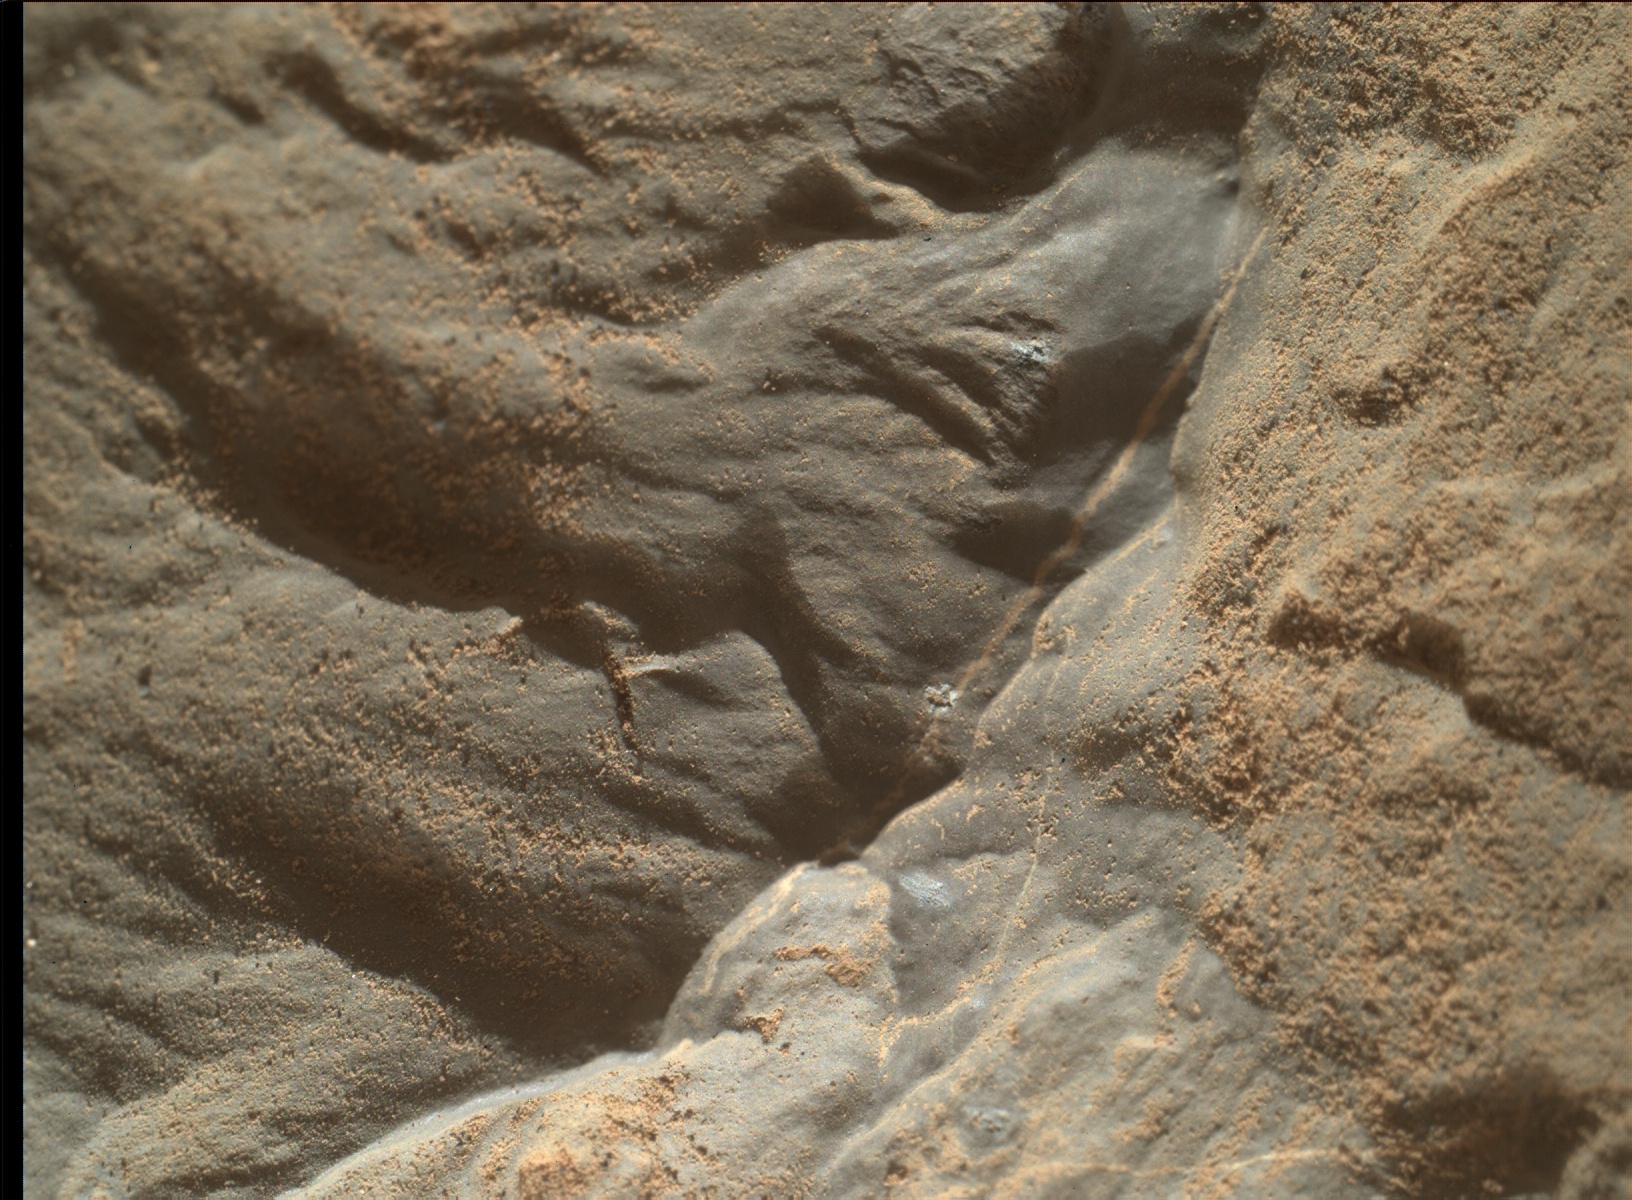 Nasa's Mars rover Curiosity acquired this image using its Mars Hand Lens Imager (MAHLI) on Sol 1879